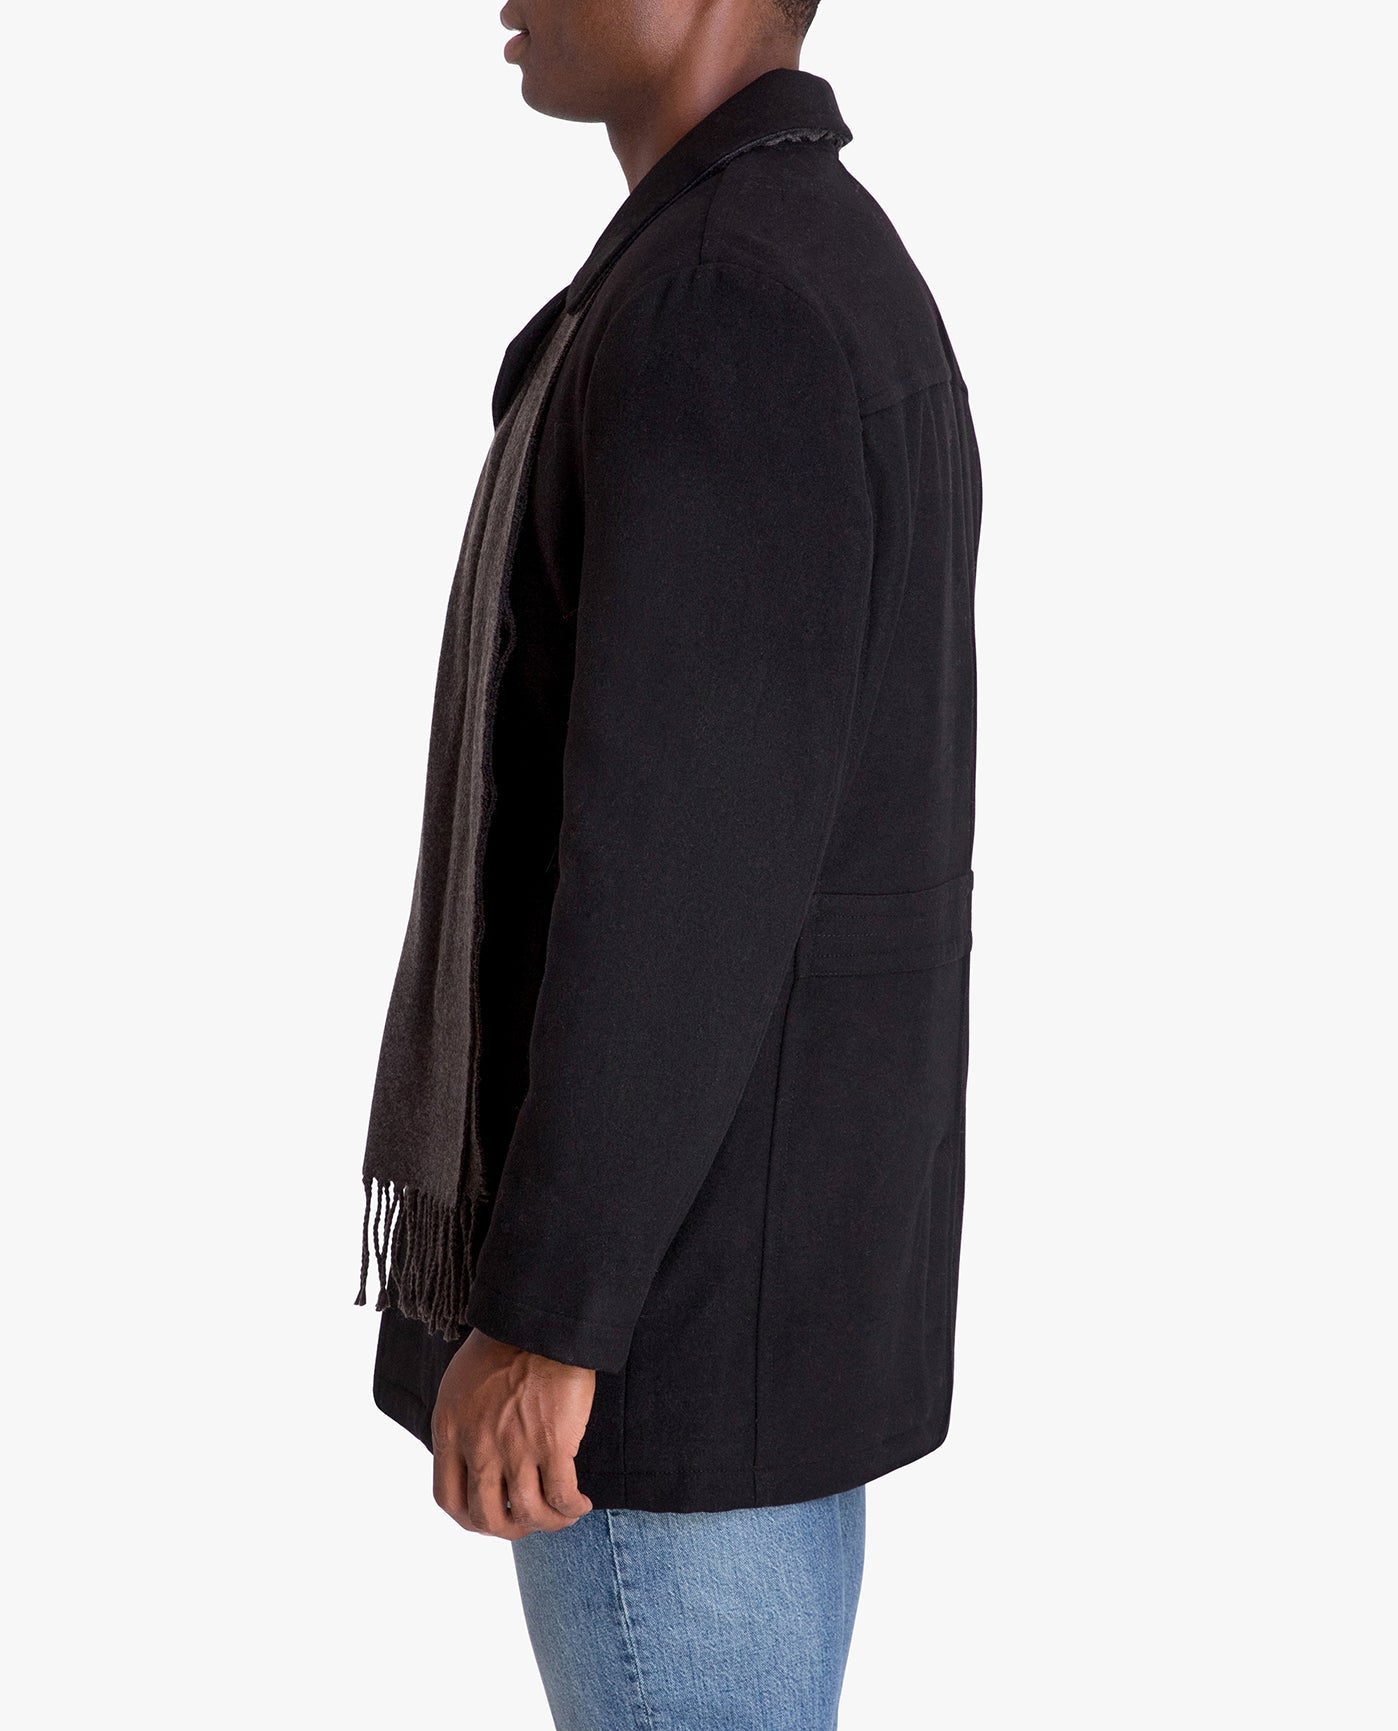 SIDE VIEW OF AMITY SINGLE BREASTED WOOL JACKET | BLACK